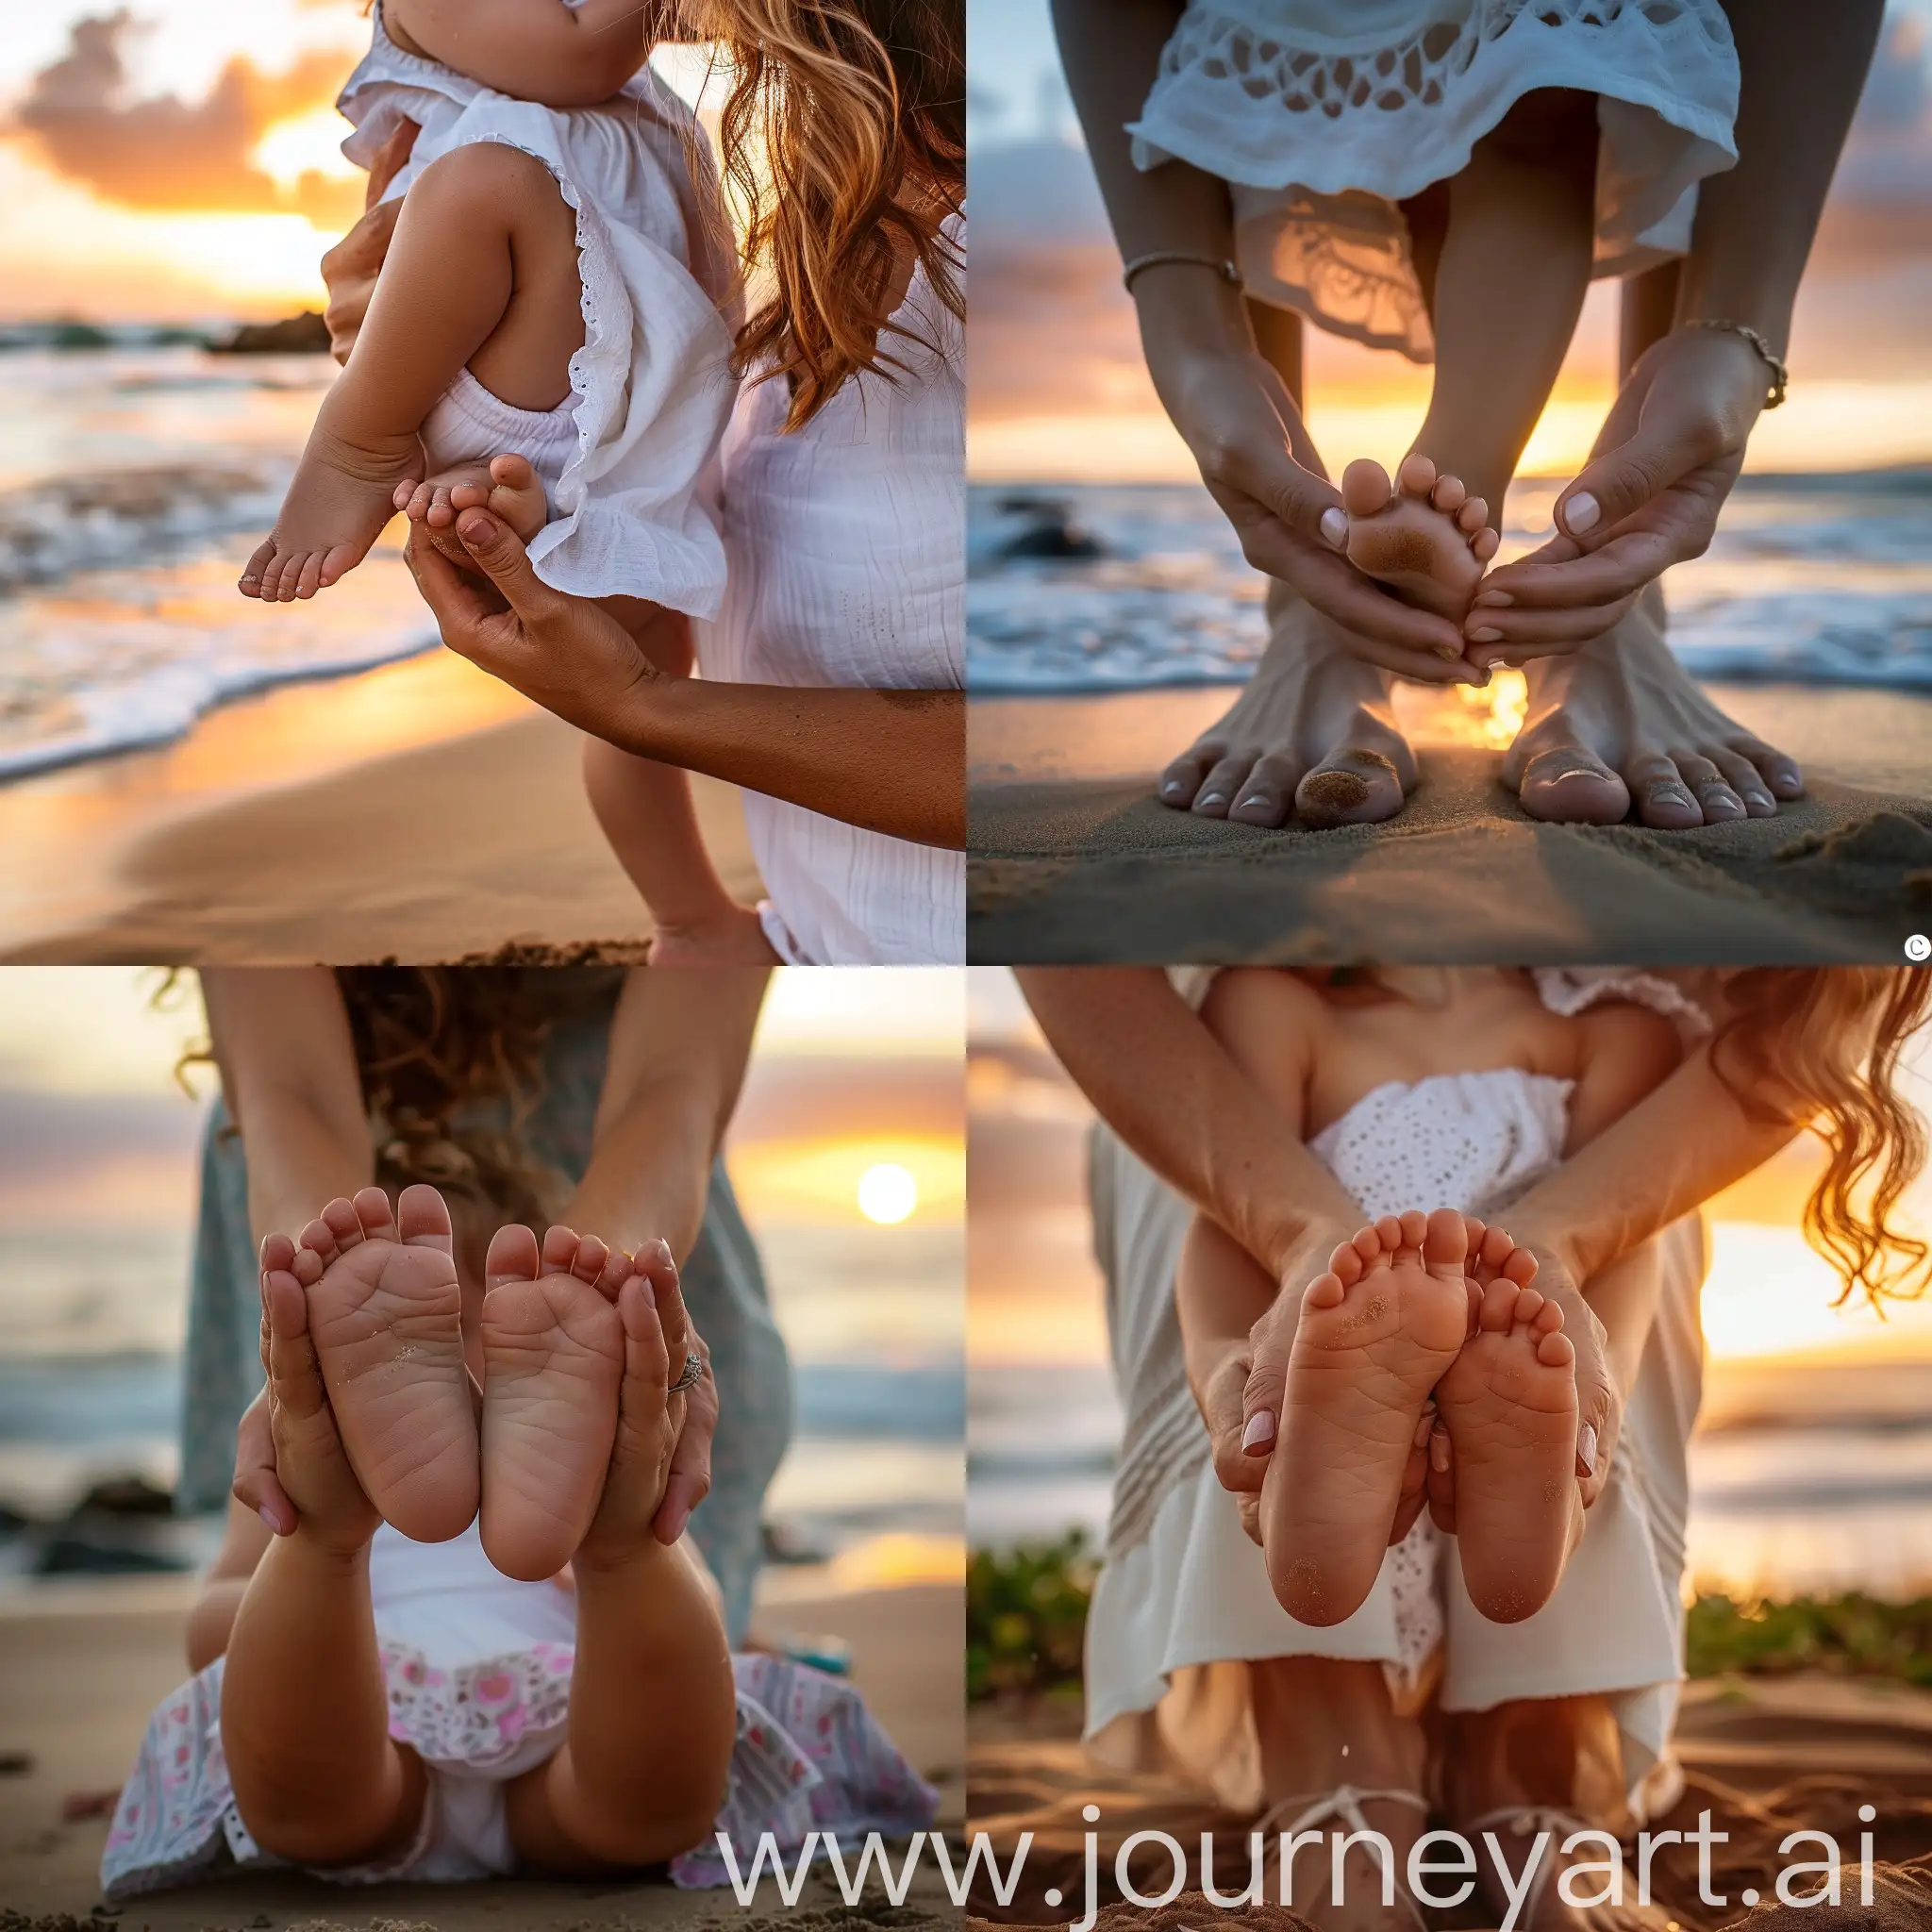 A loving mother cradles her daughters feet in her hands in a beach at sunset. With immense affection, she kisses the soles of her daughters adorable little feet showcasing her love and tenderness. This is a tender moment shared between the mother and her daughter